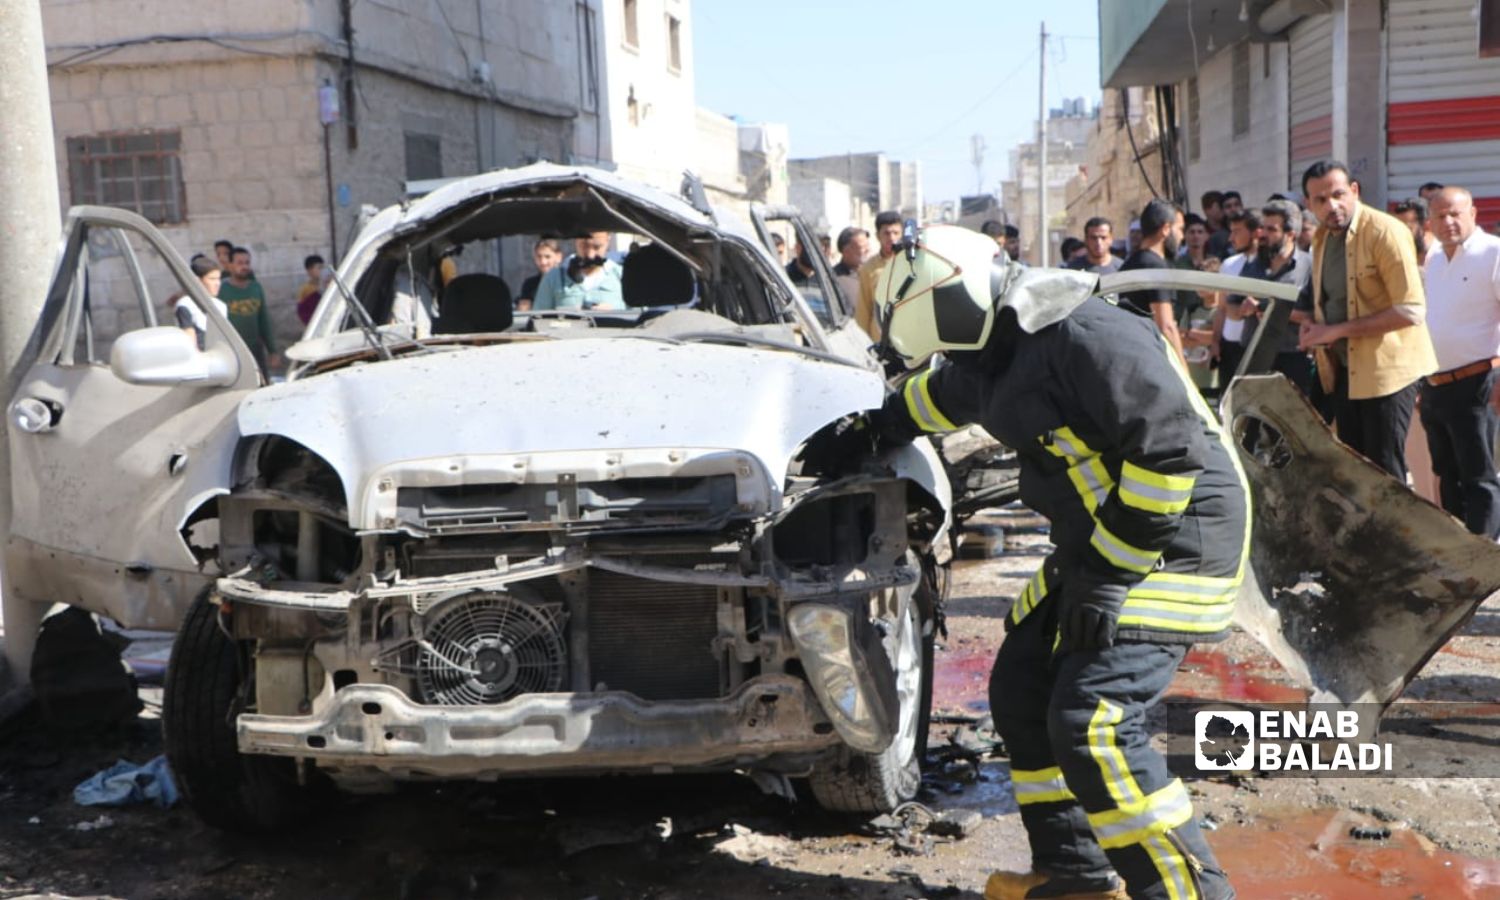 A member of the Syria Civil Defense at the scene of the explosion of an explosive device in the city of al-Bab in the eastern countryside of Aleppo - 15 June 2022 (Enab Baladi / Siraj Mohammad)